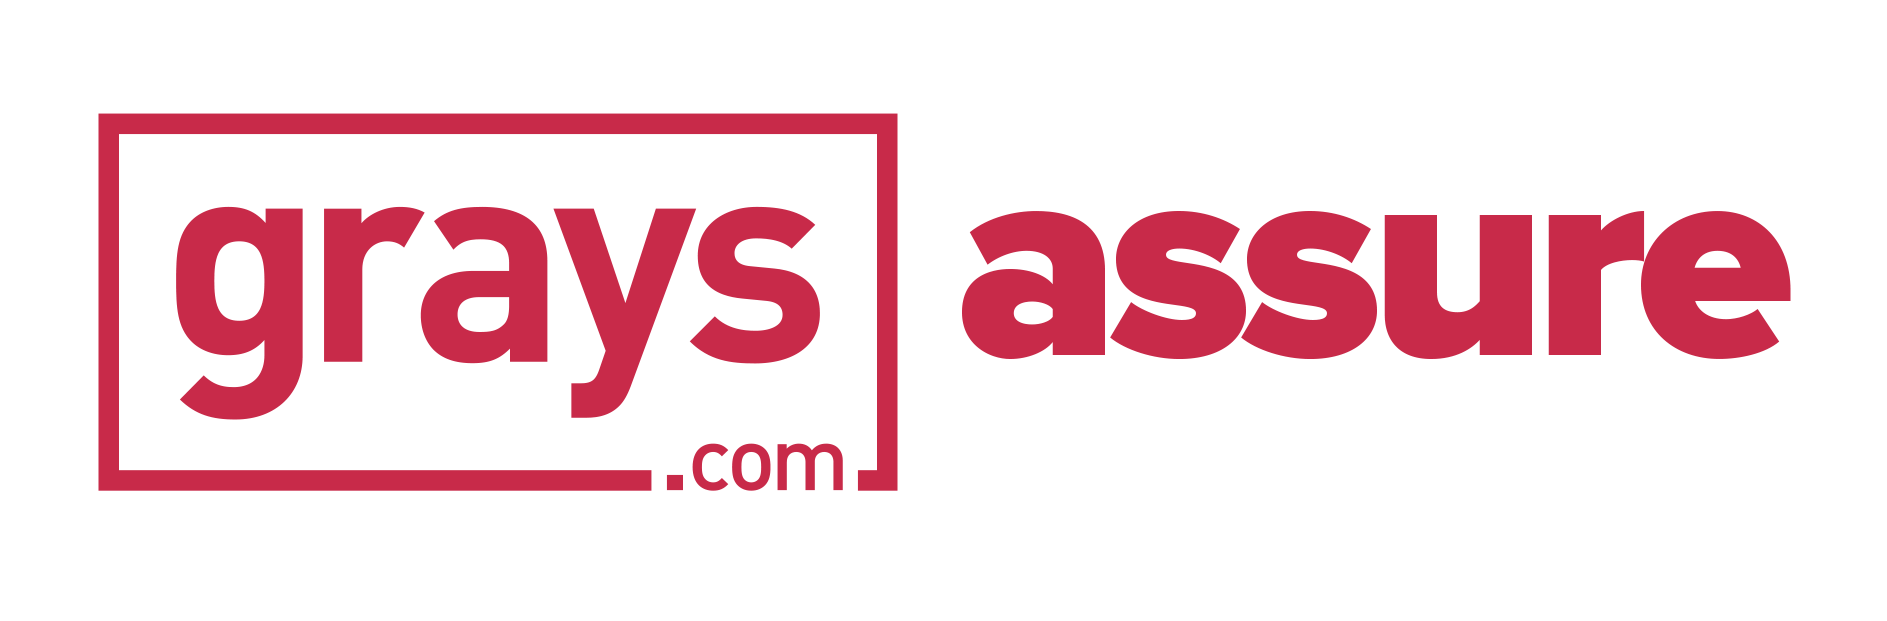 Grays-Assure-4-Red-Proxima.png